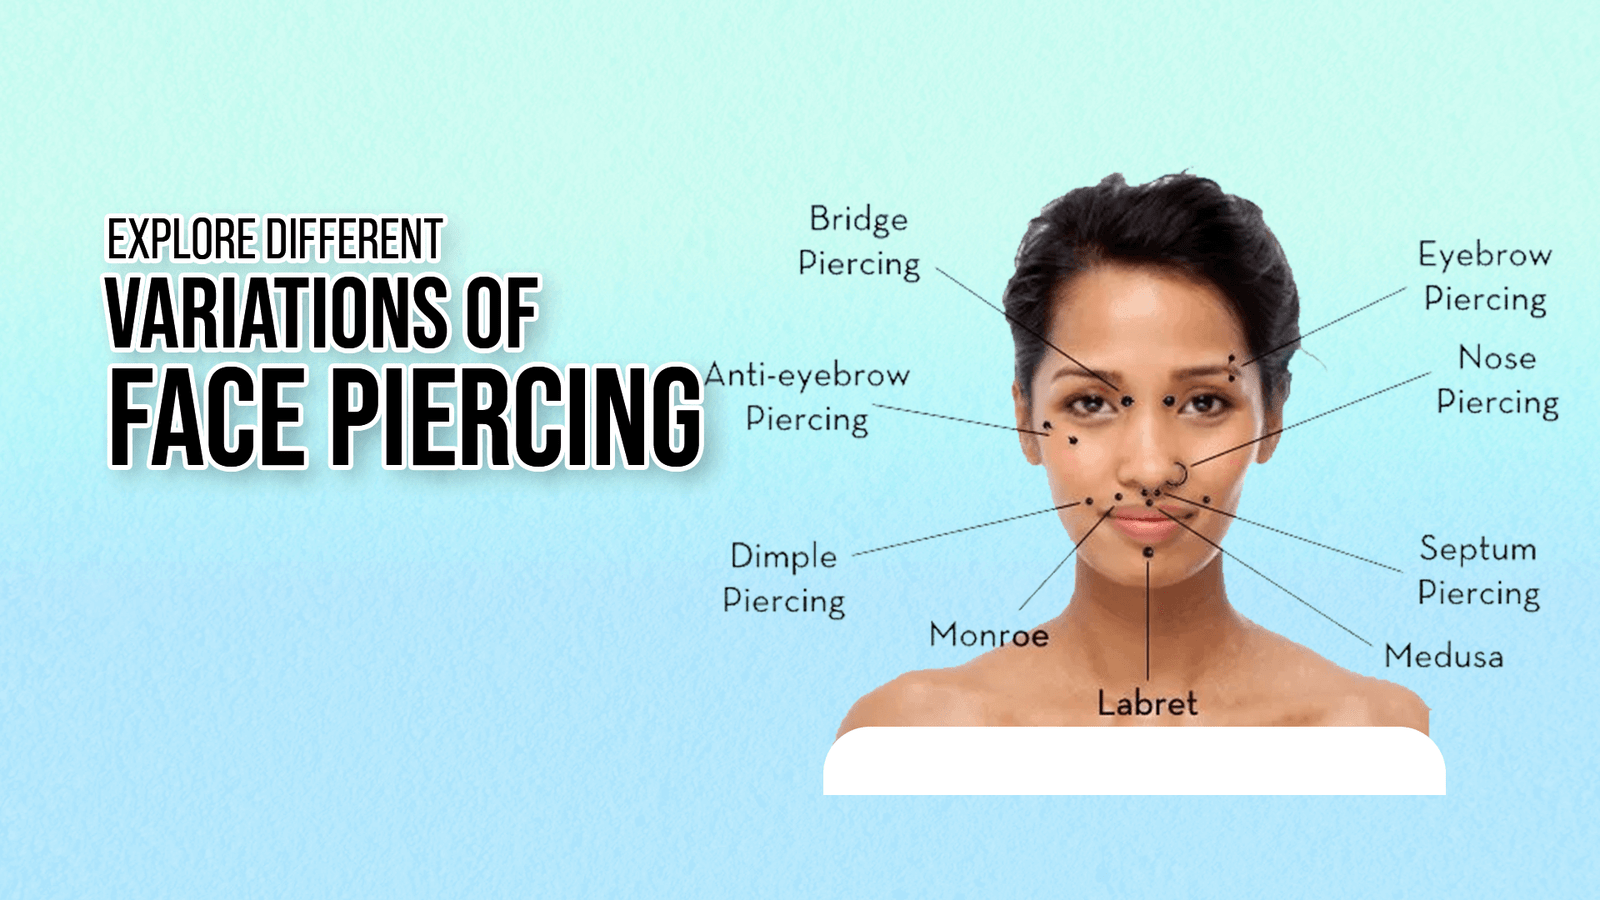 Explore Different Variations of Face Piercing